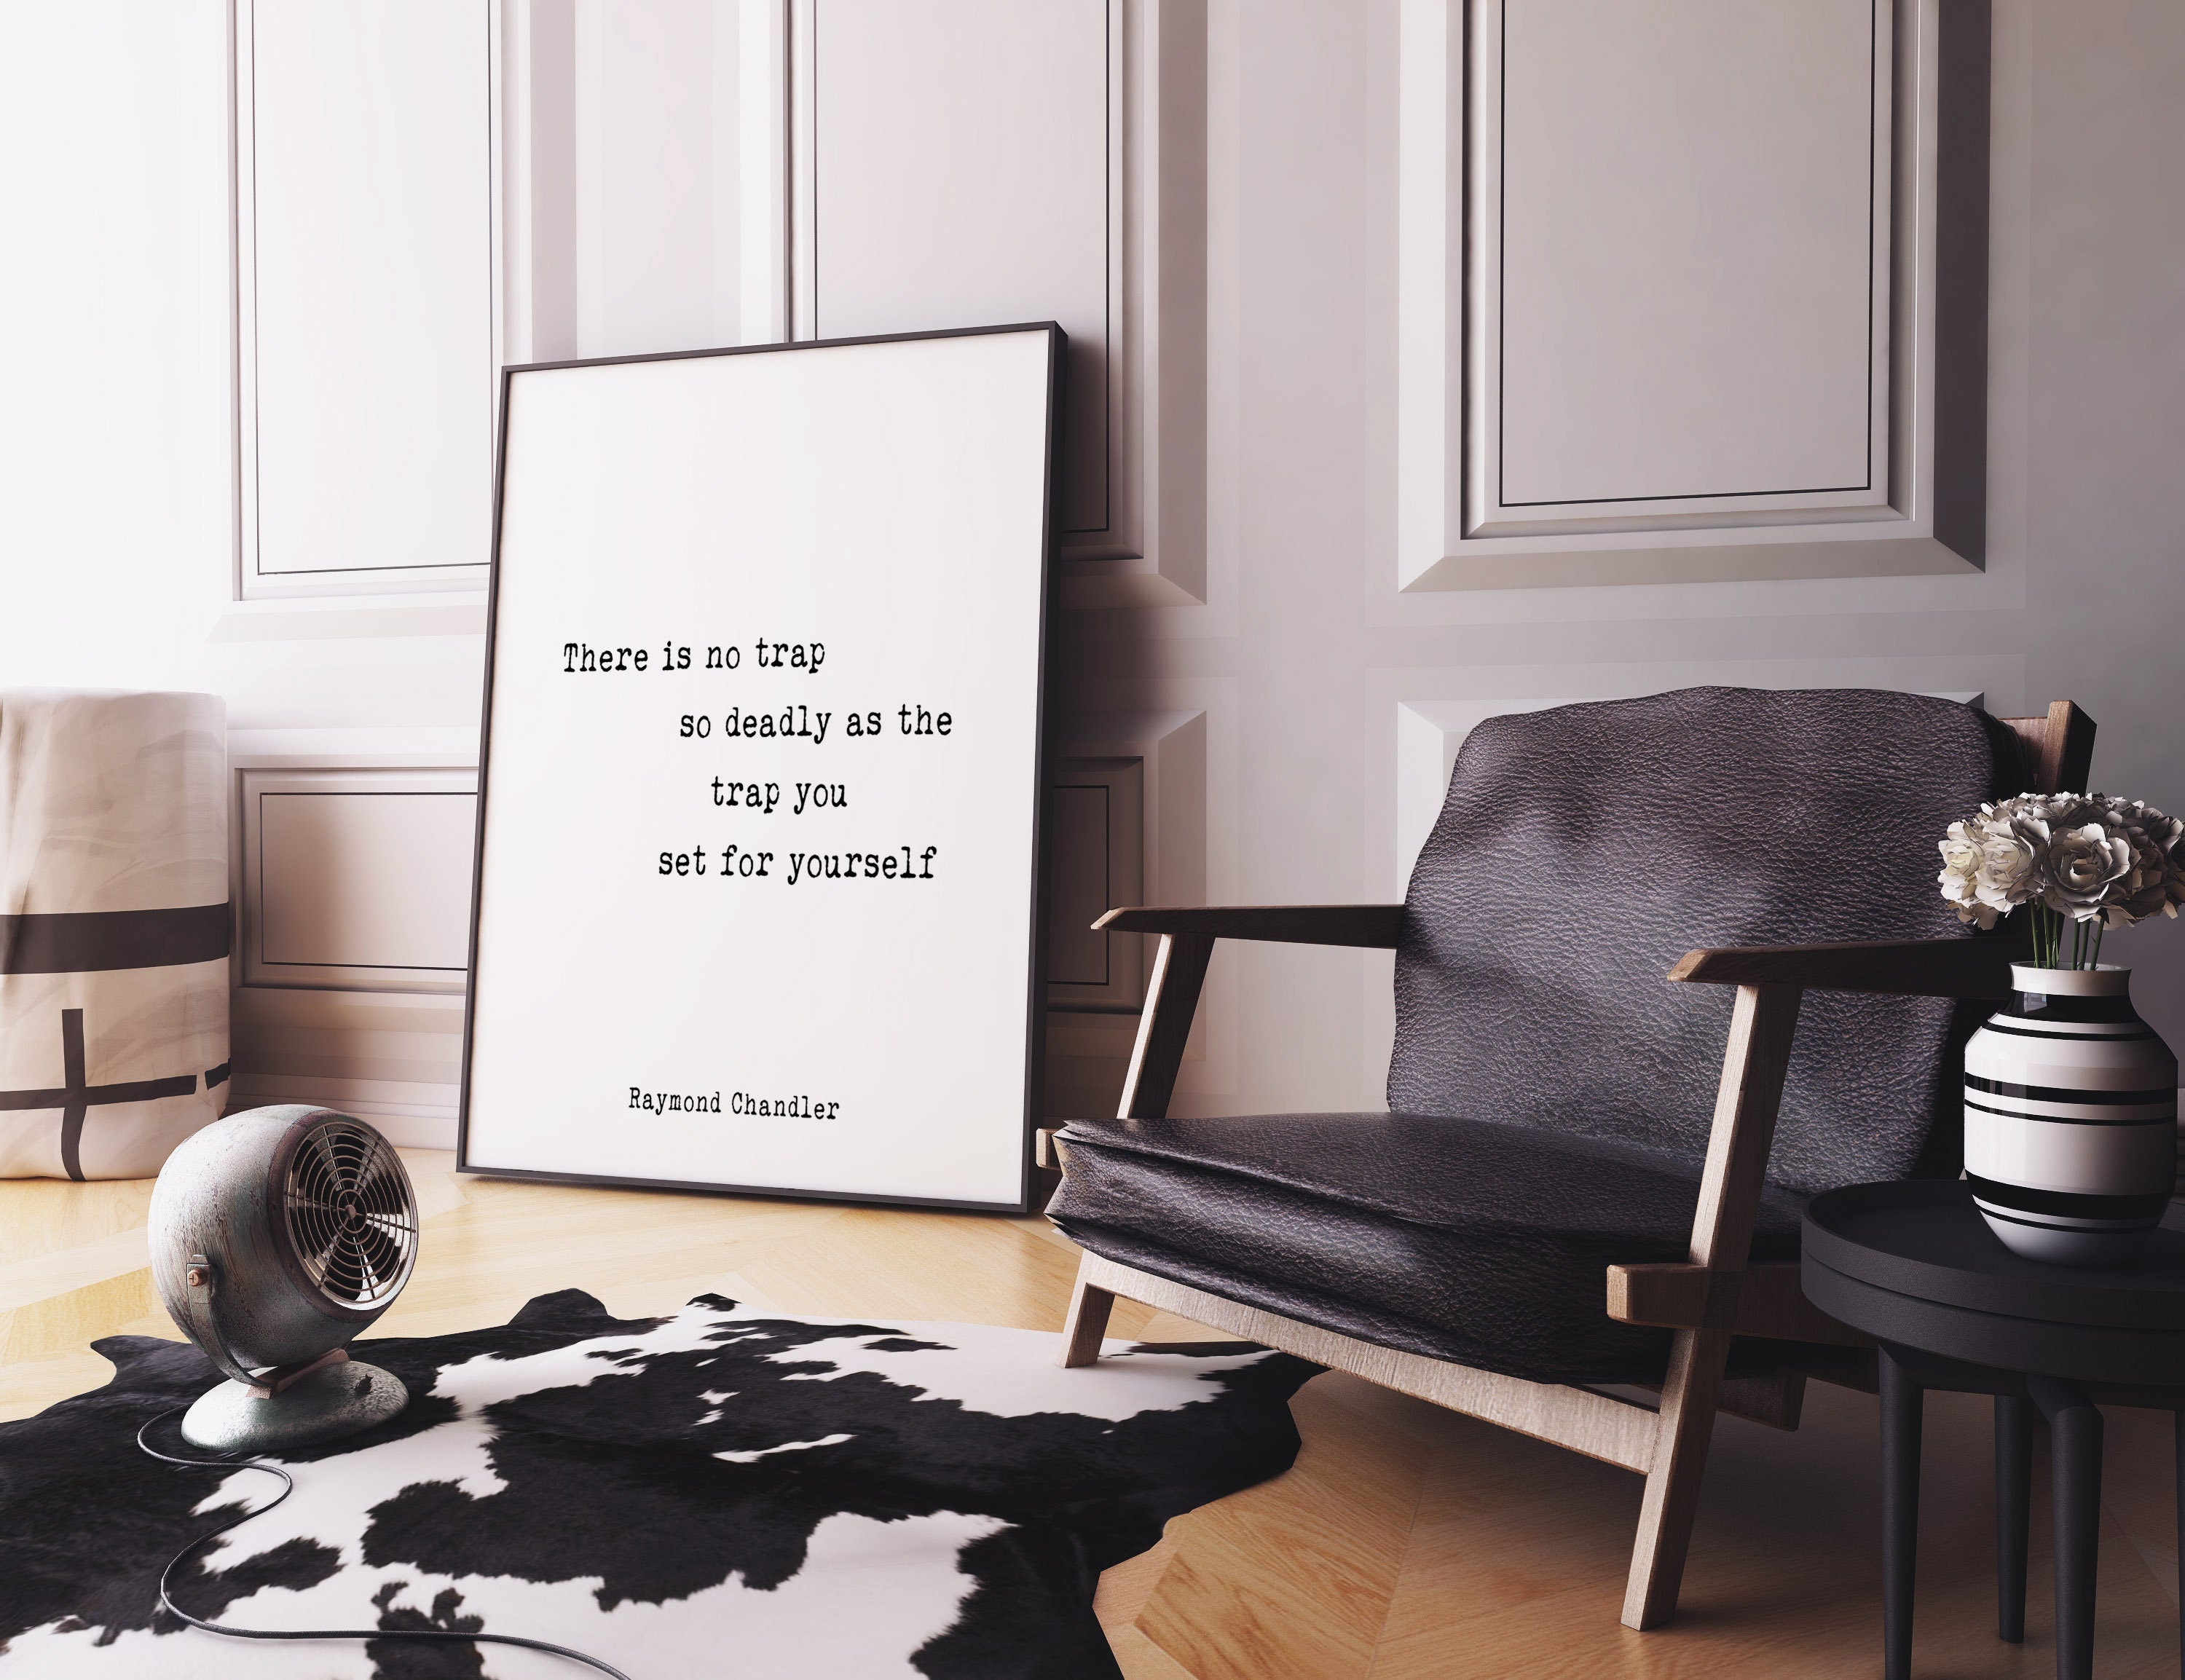 Raymond Chandler quote print, There is no trap so deadly